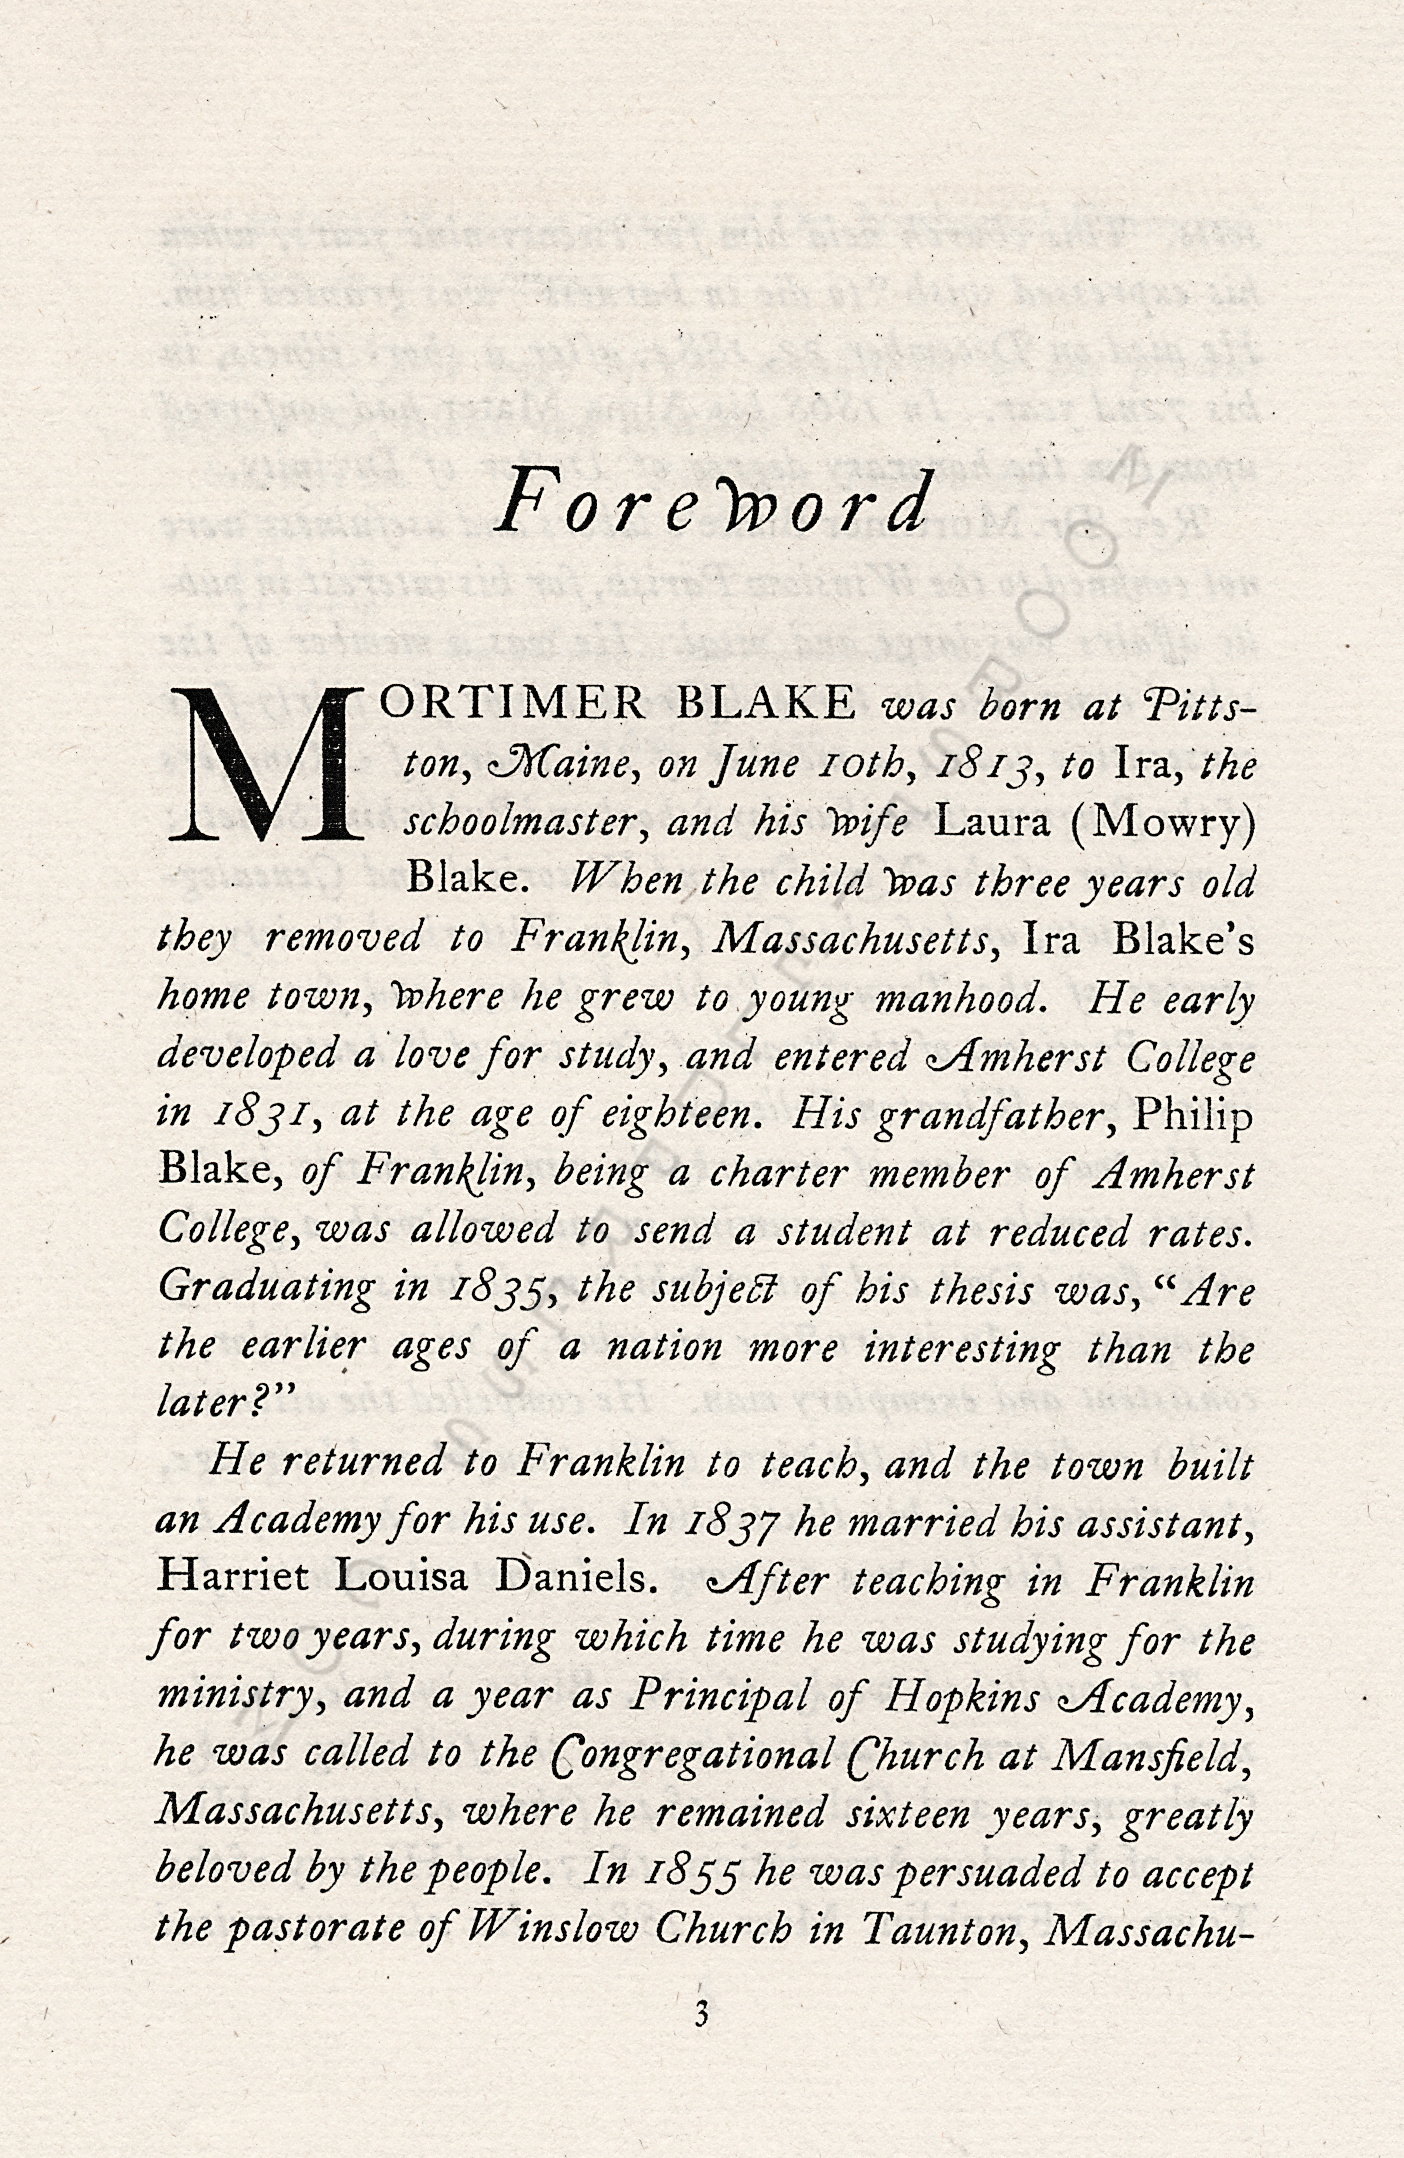 Examples
                      of the Moorsfield Press Caslon Typeface